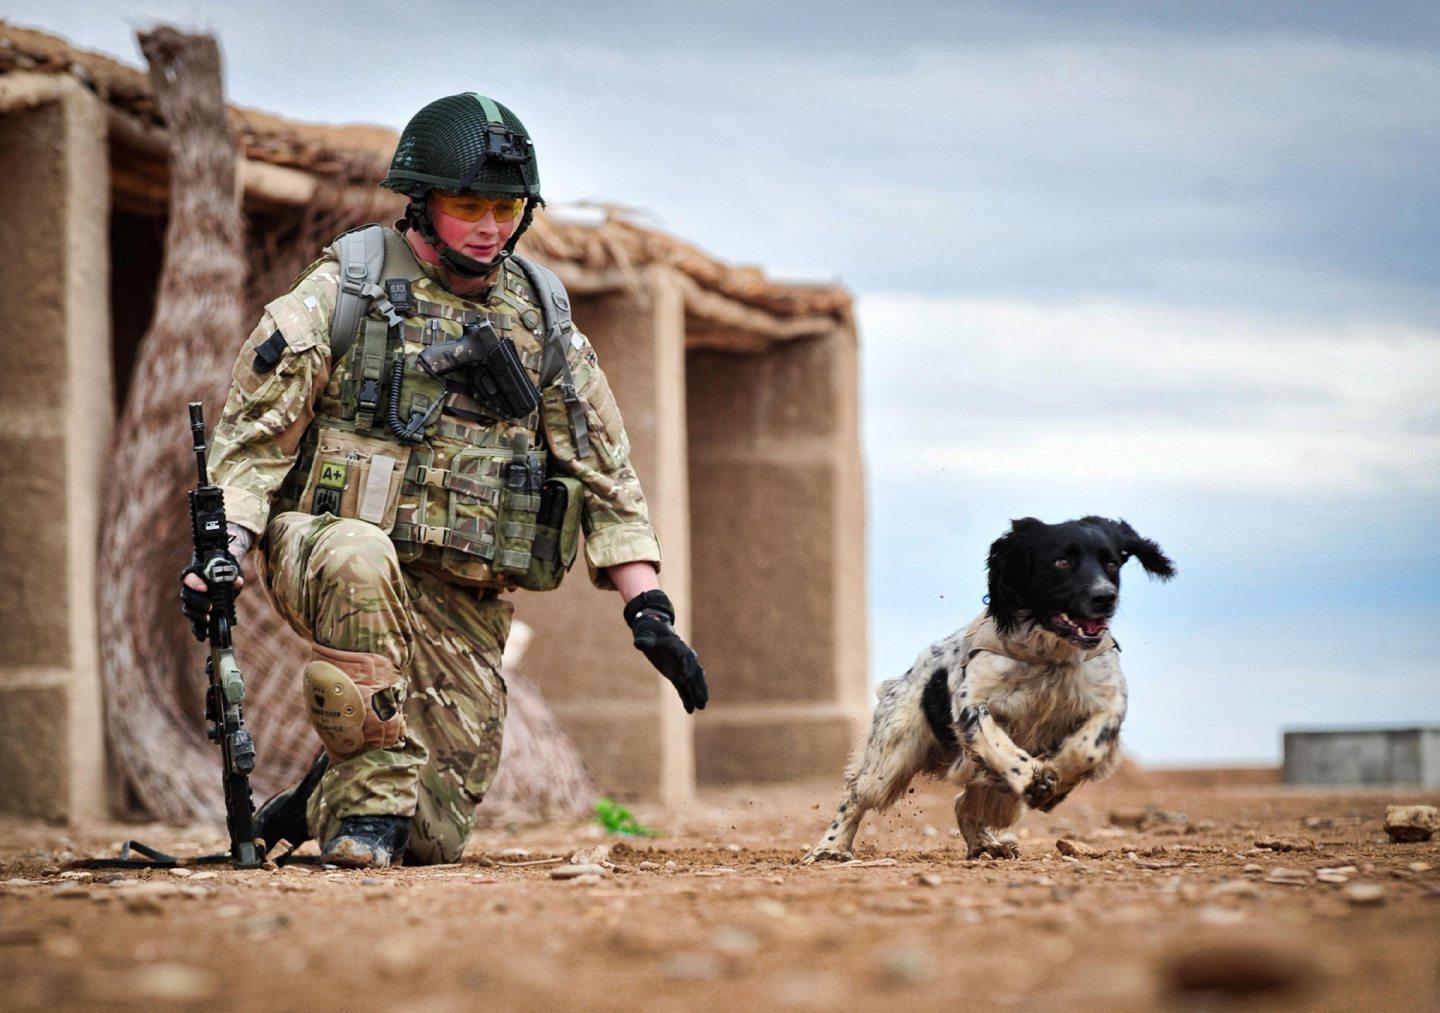 Lance Corporal Liam Tasker and his Springer spaniel Theo on active duty in Afghanistan